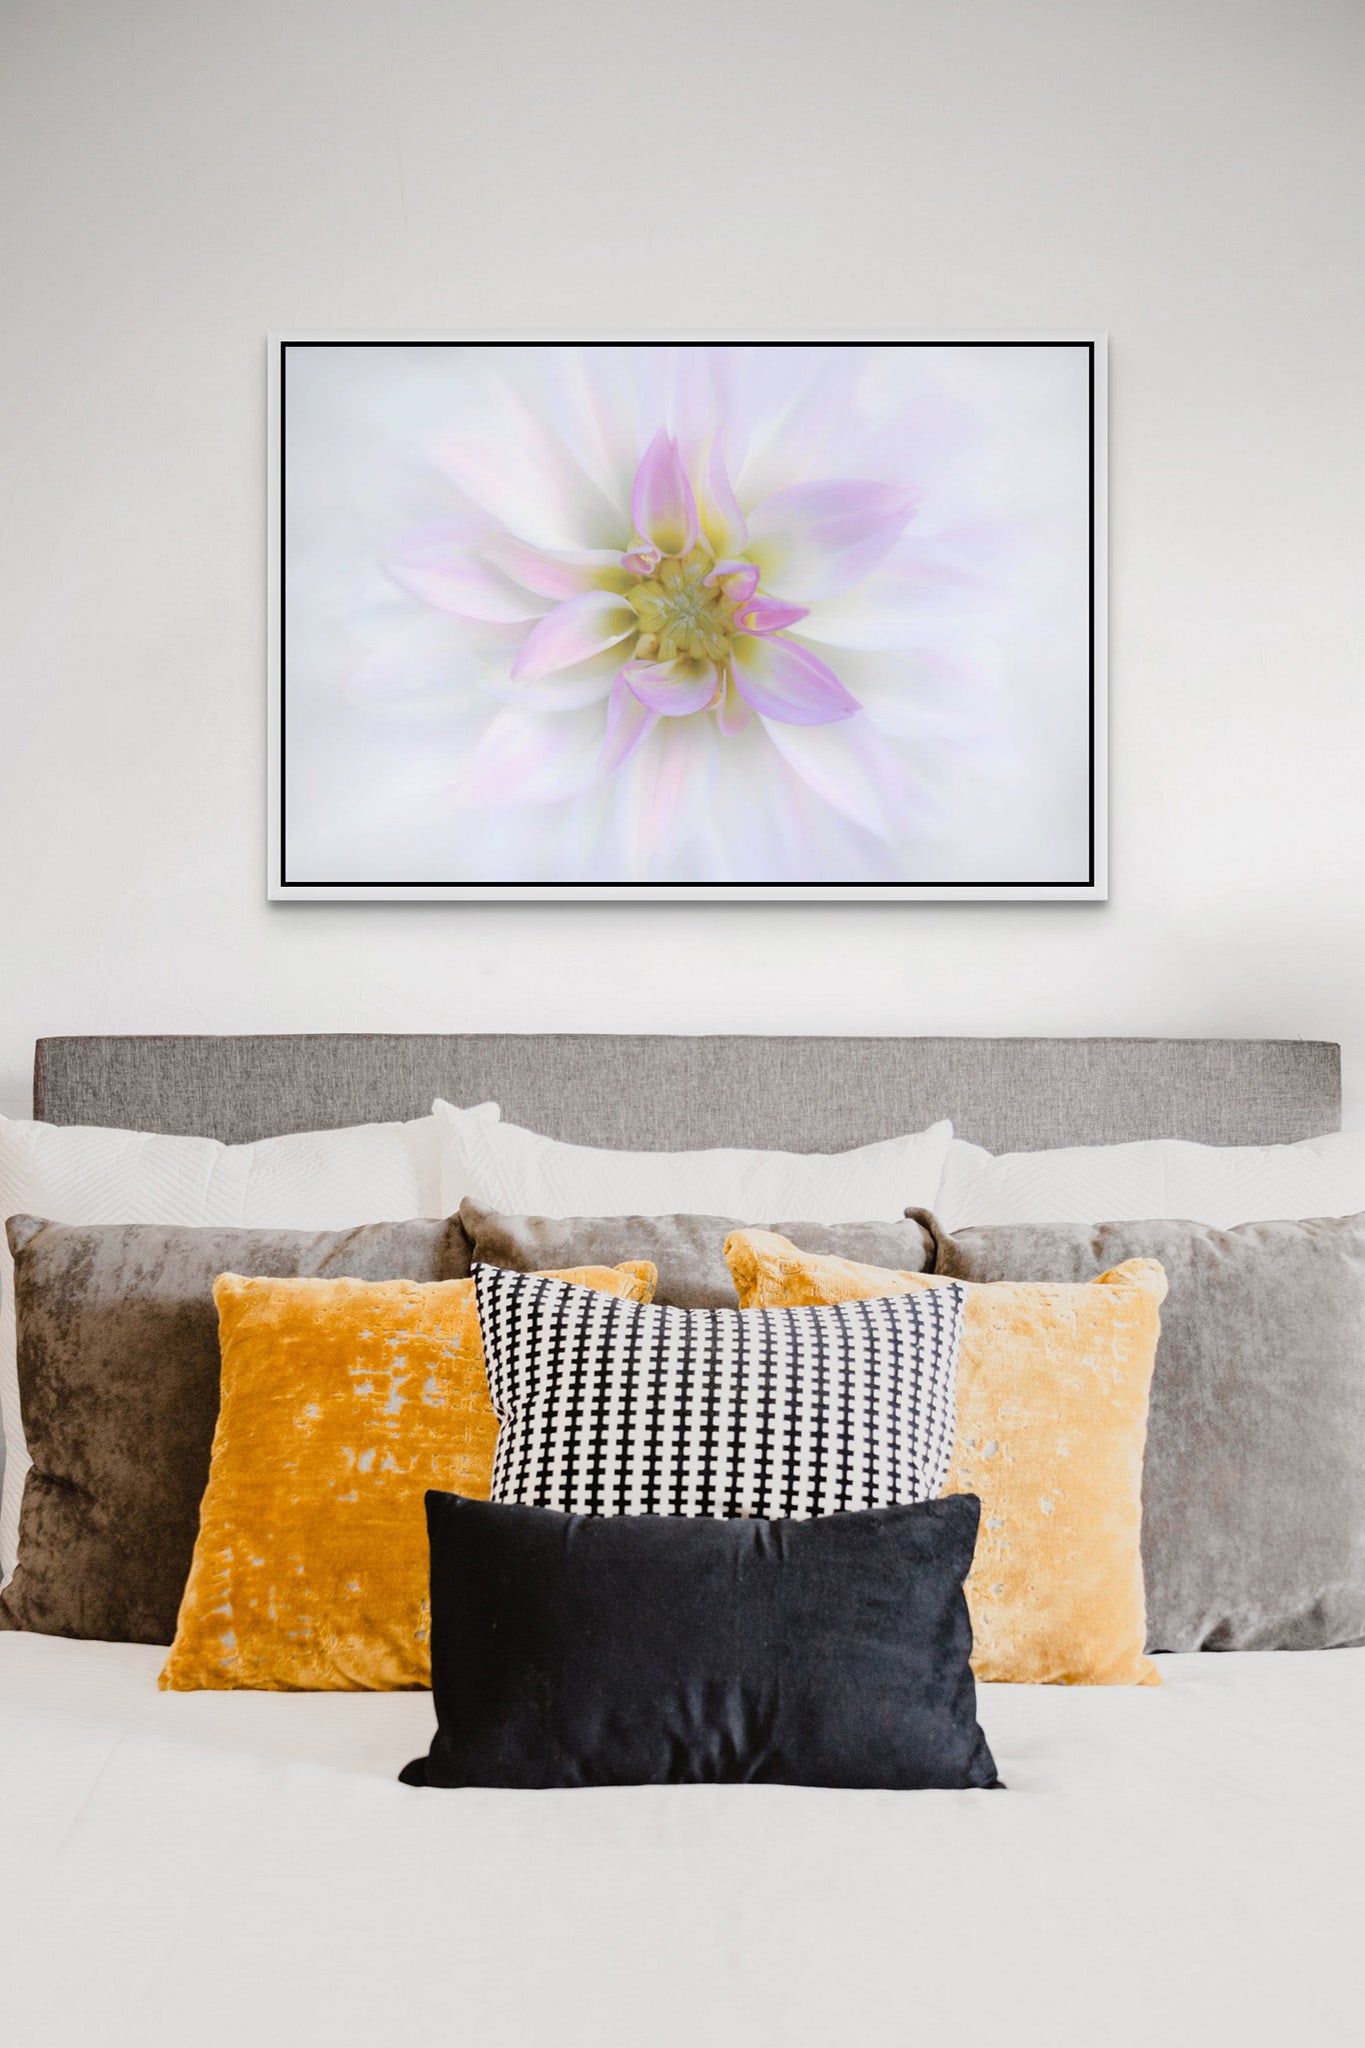 Flower photograph of a white dahlia by Cameron Decaux hanging on the wall of a bedroom.